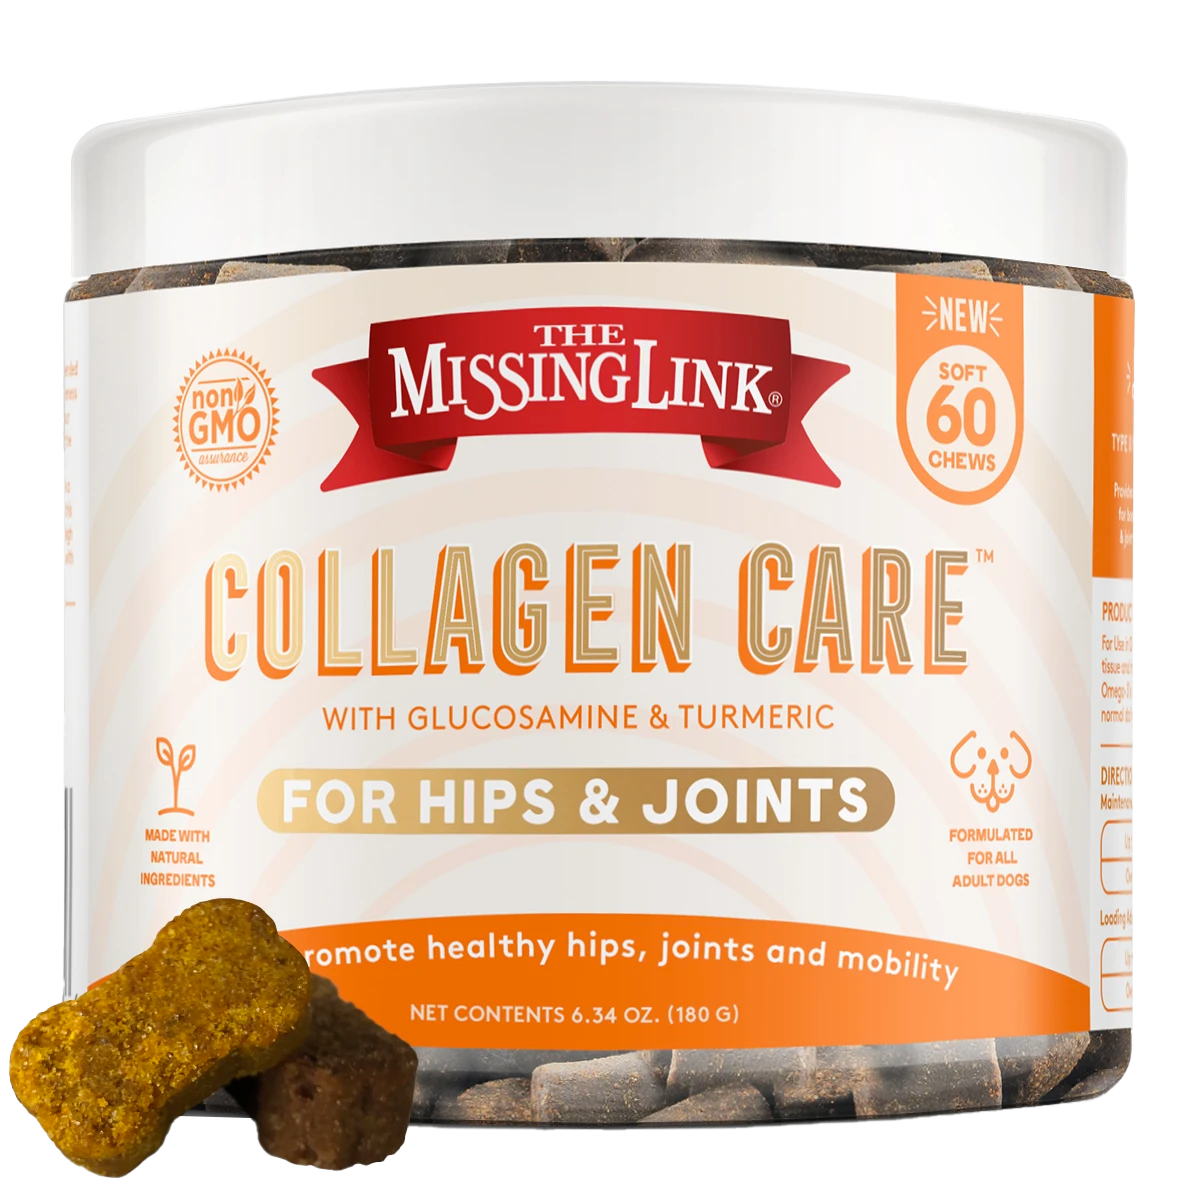 Collagen Care Hips & Joints Soft Chew 60Ct